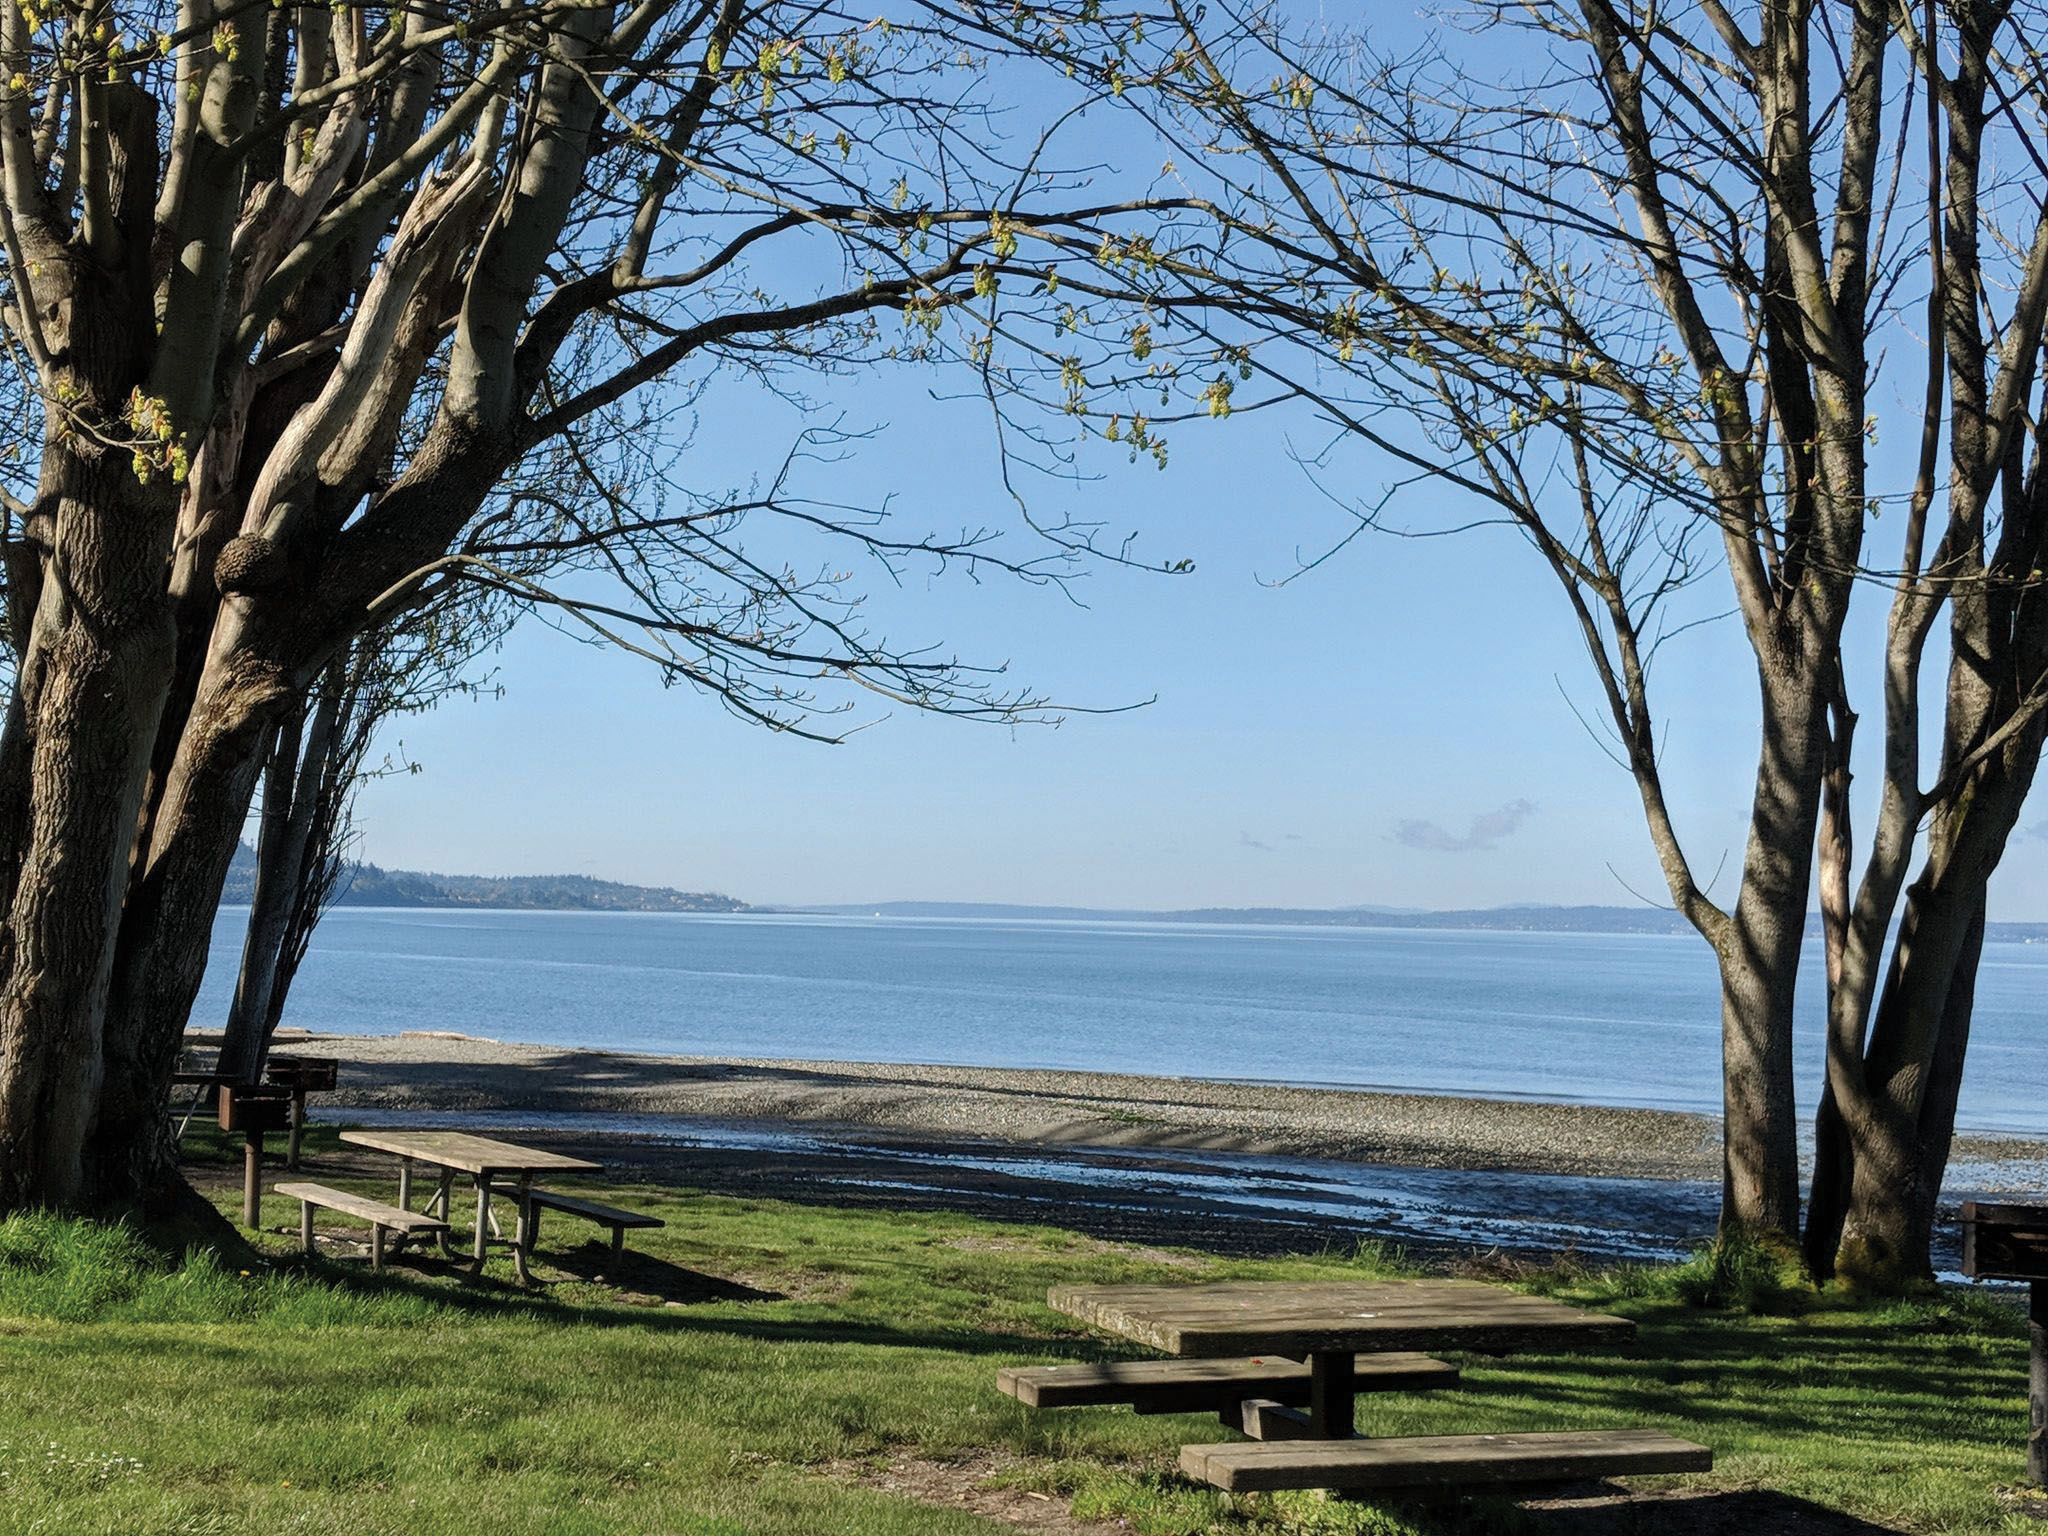 "Grassy park with picnic tables looking out to Puget Sound"